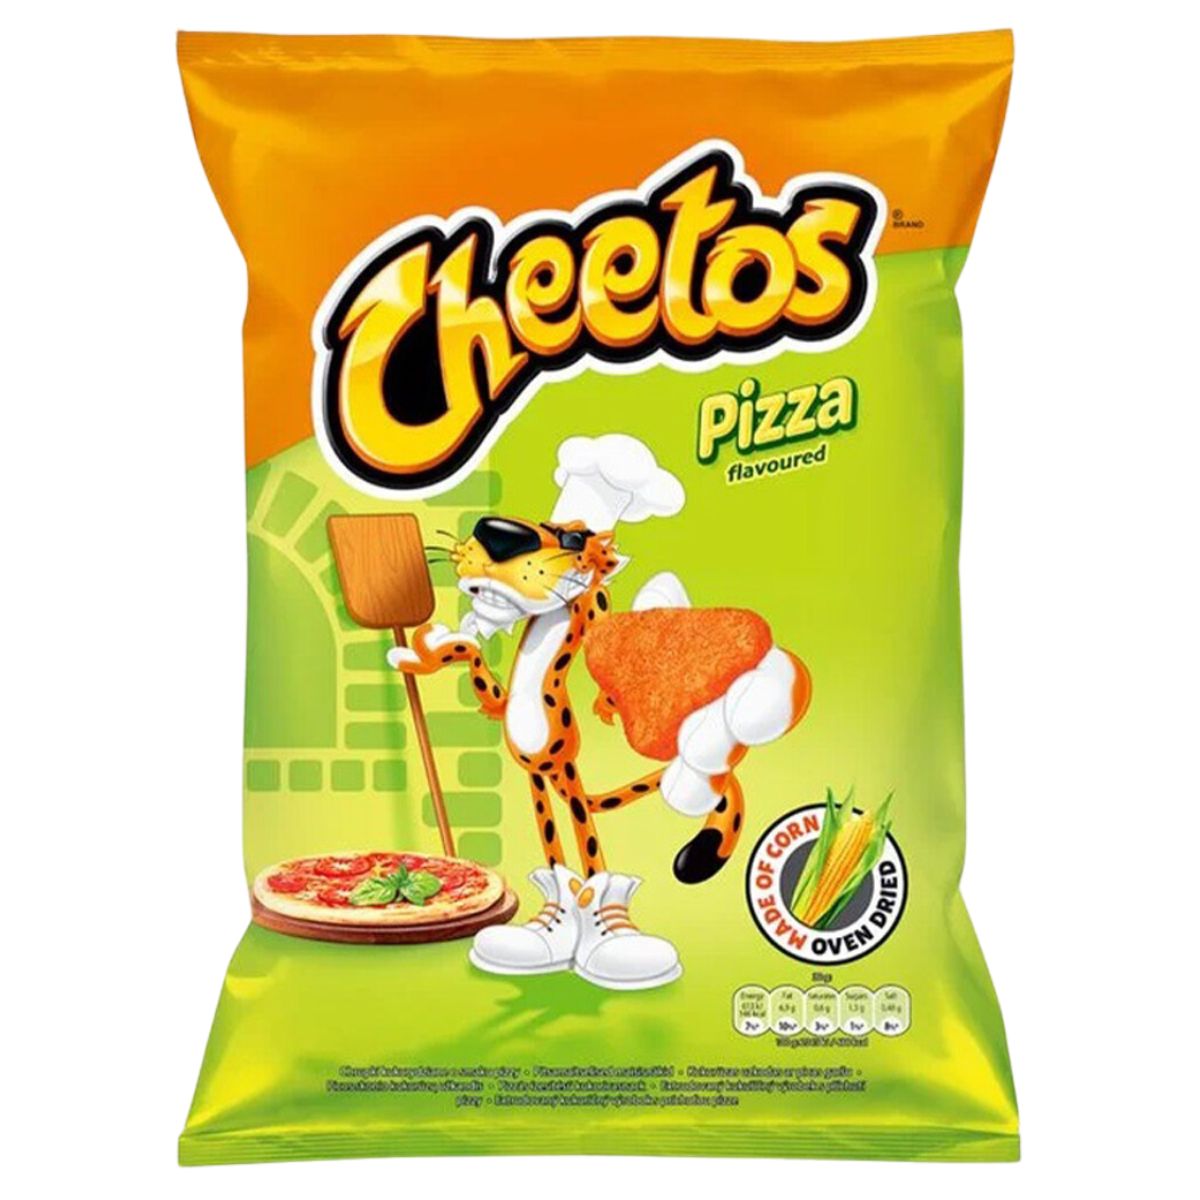 Cheetos - Pizza - 160g chips in a bag.